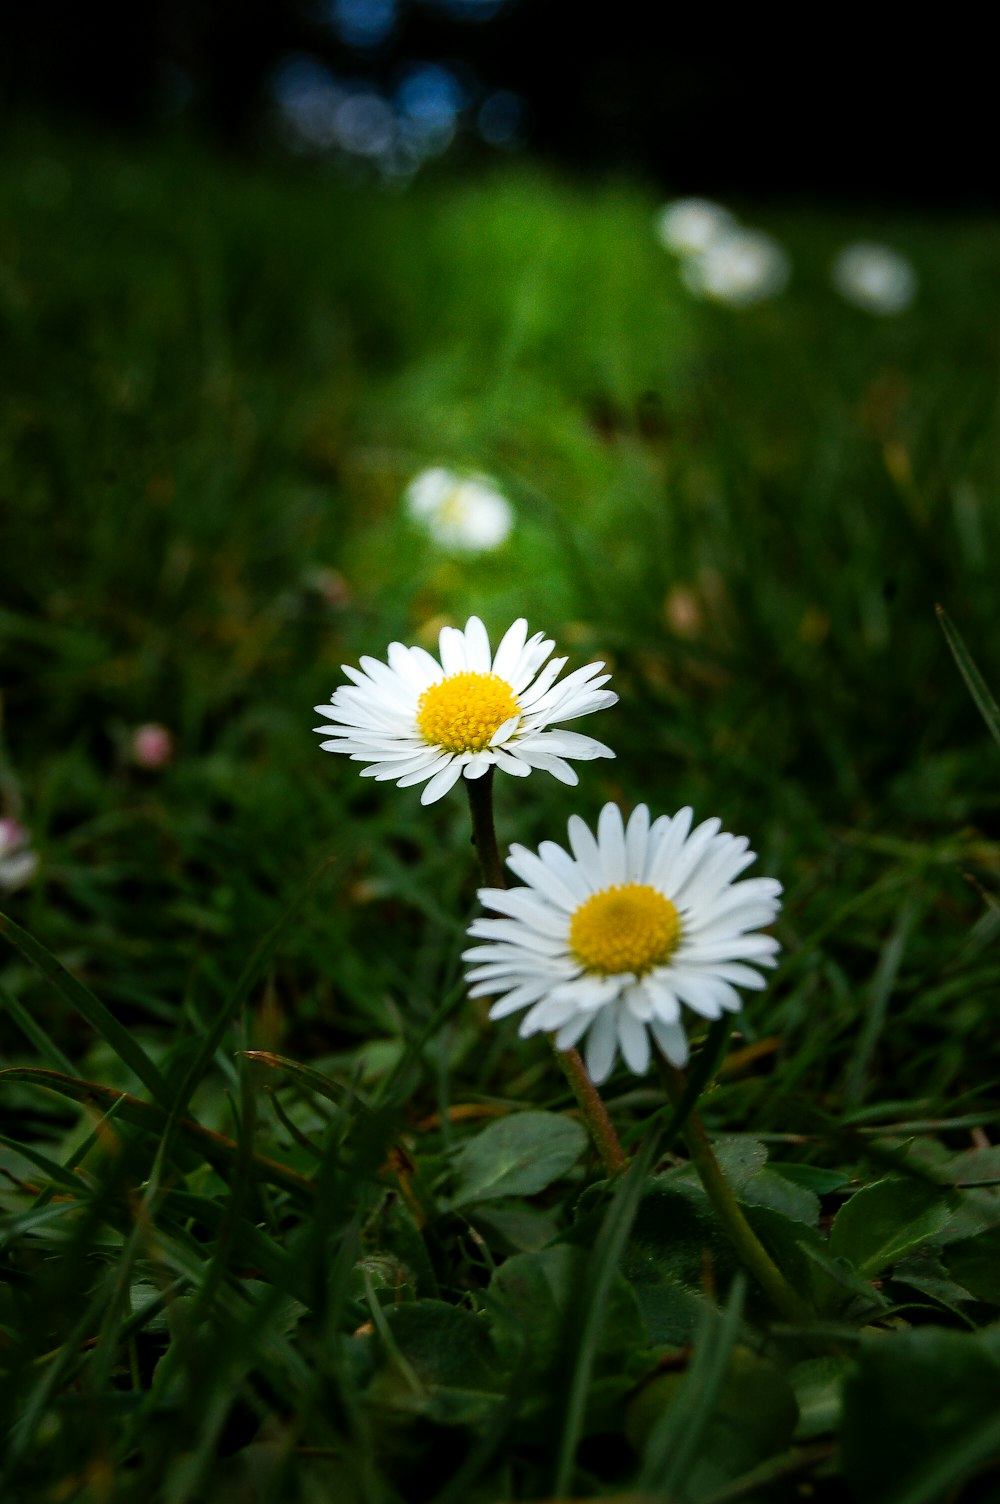 two daisies in the grass with a black background